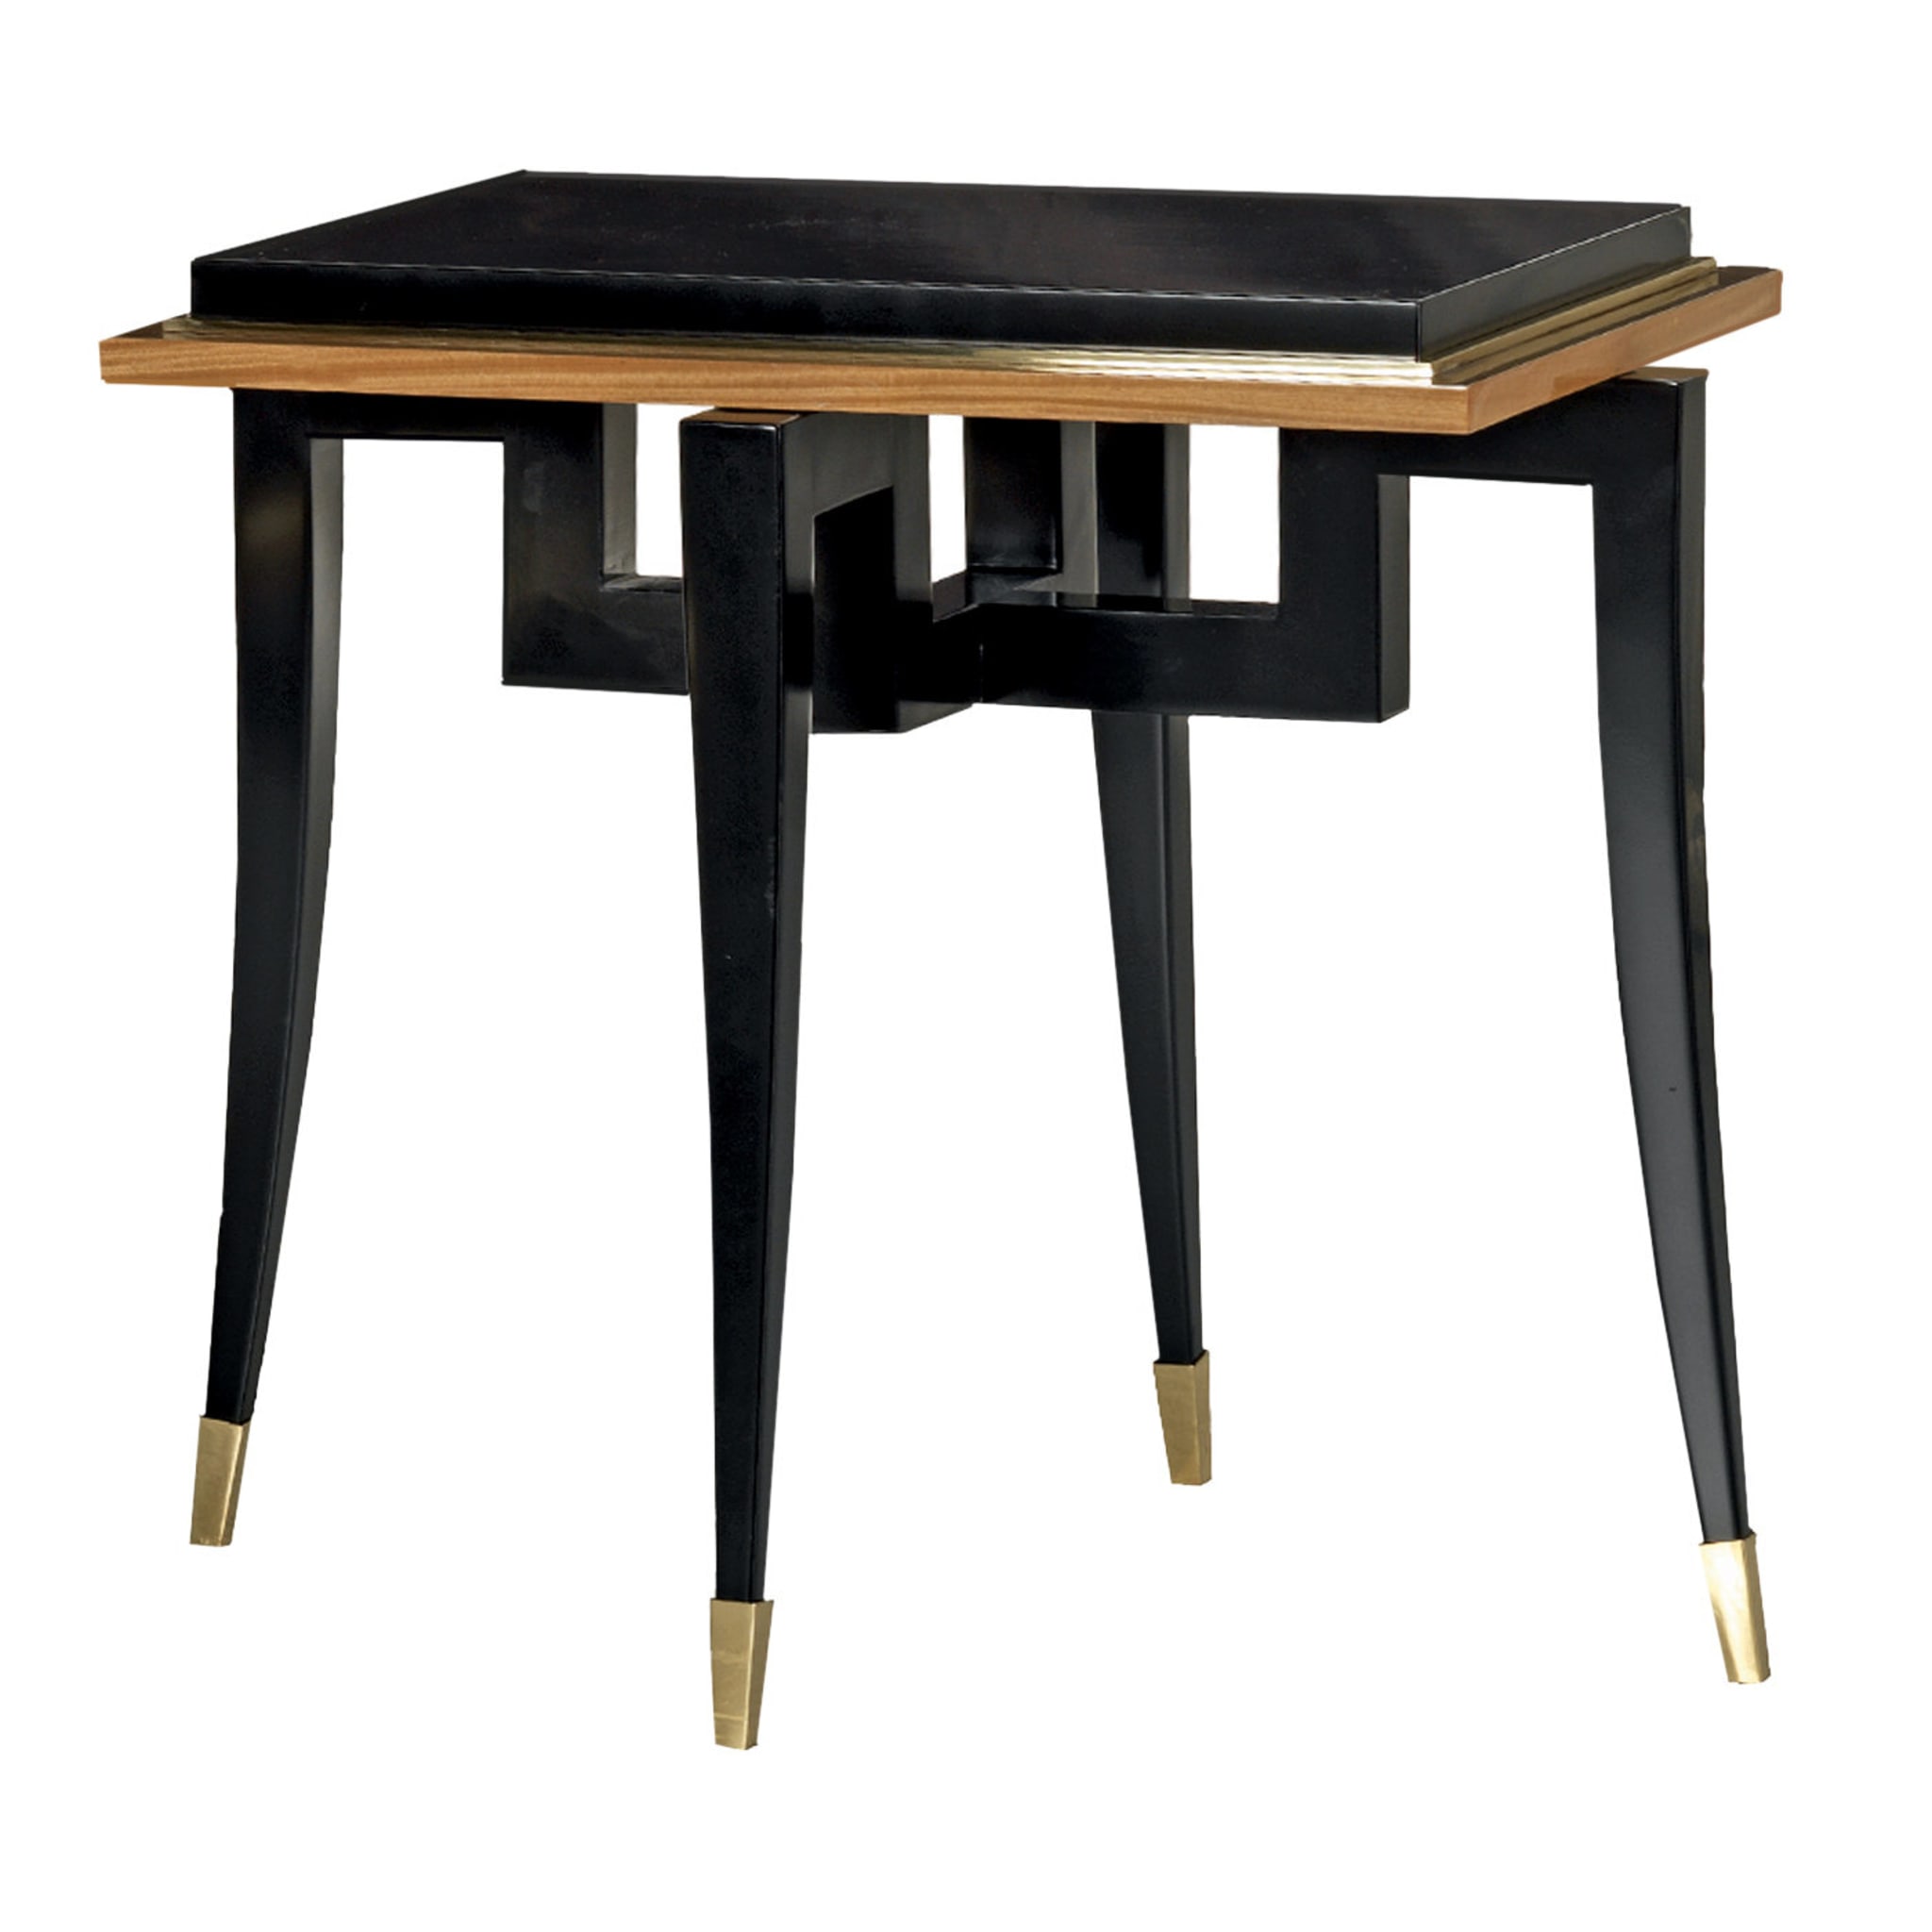 Citronnier Wood Side Table with Black Finish - Main view